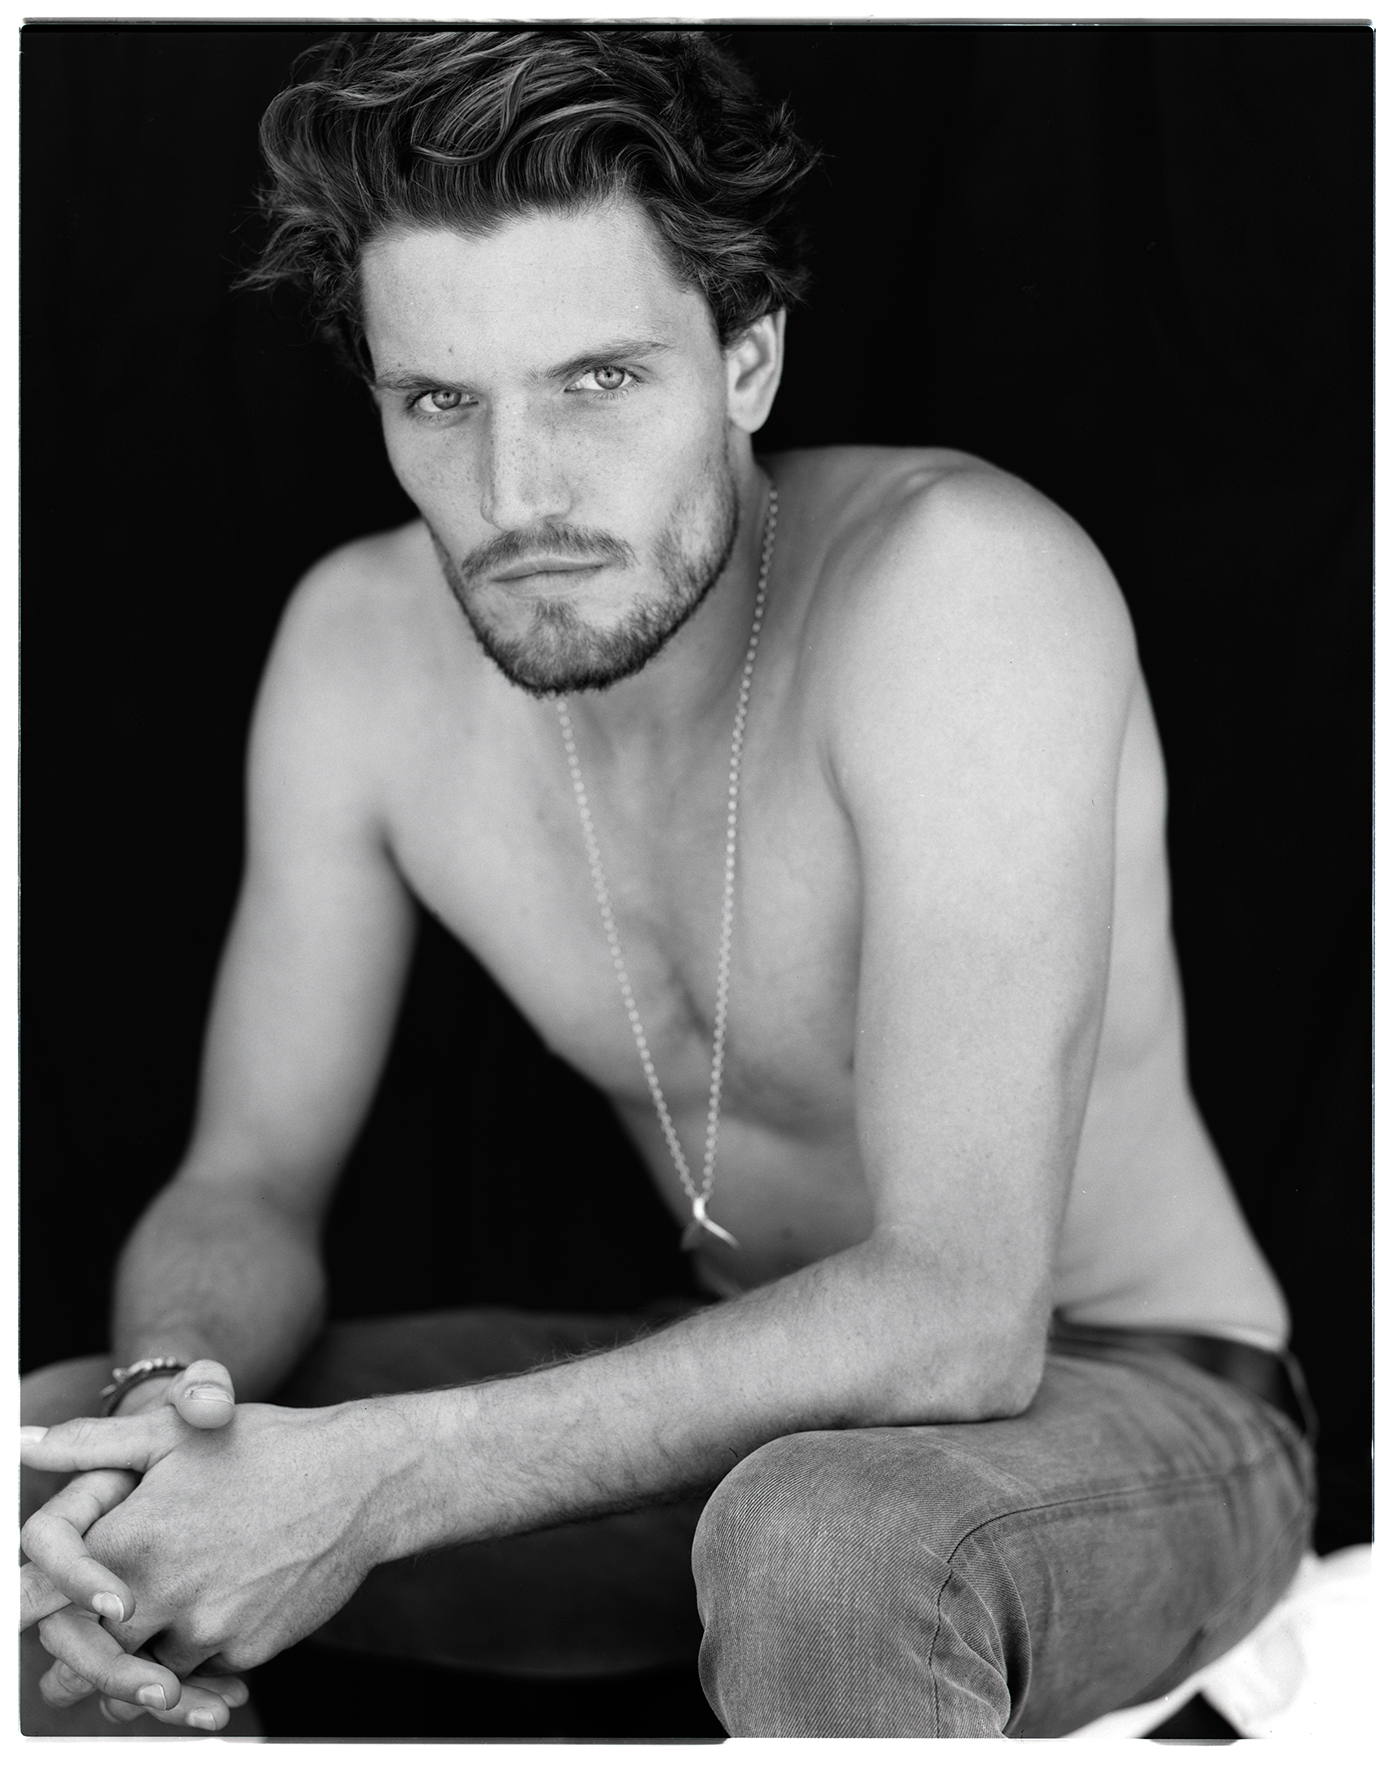 benjo arwas Next Models male modes editorial casting the fashionisto film is not dead large format black and white beauty portraits Los Angeles models Polaroids